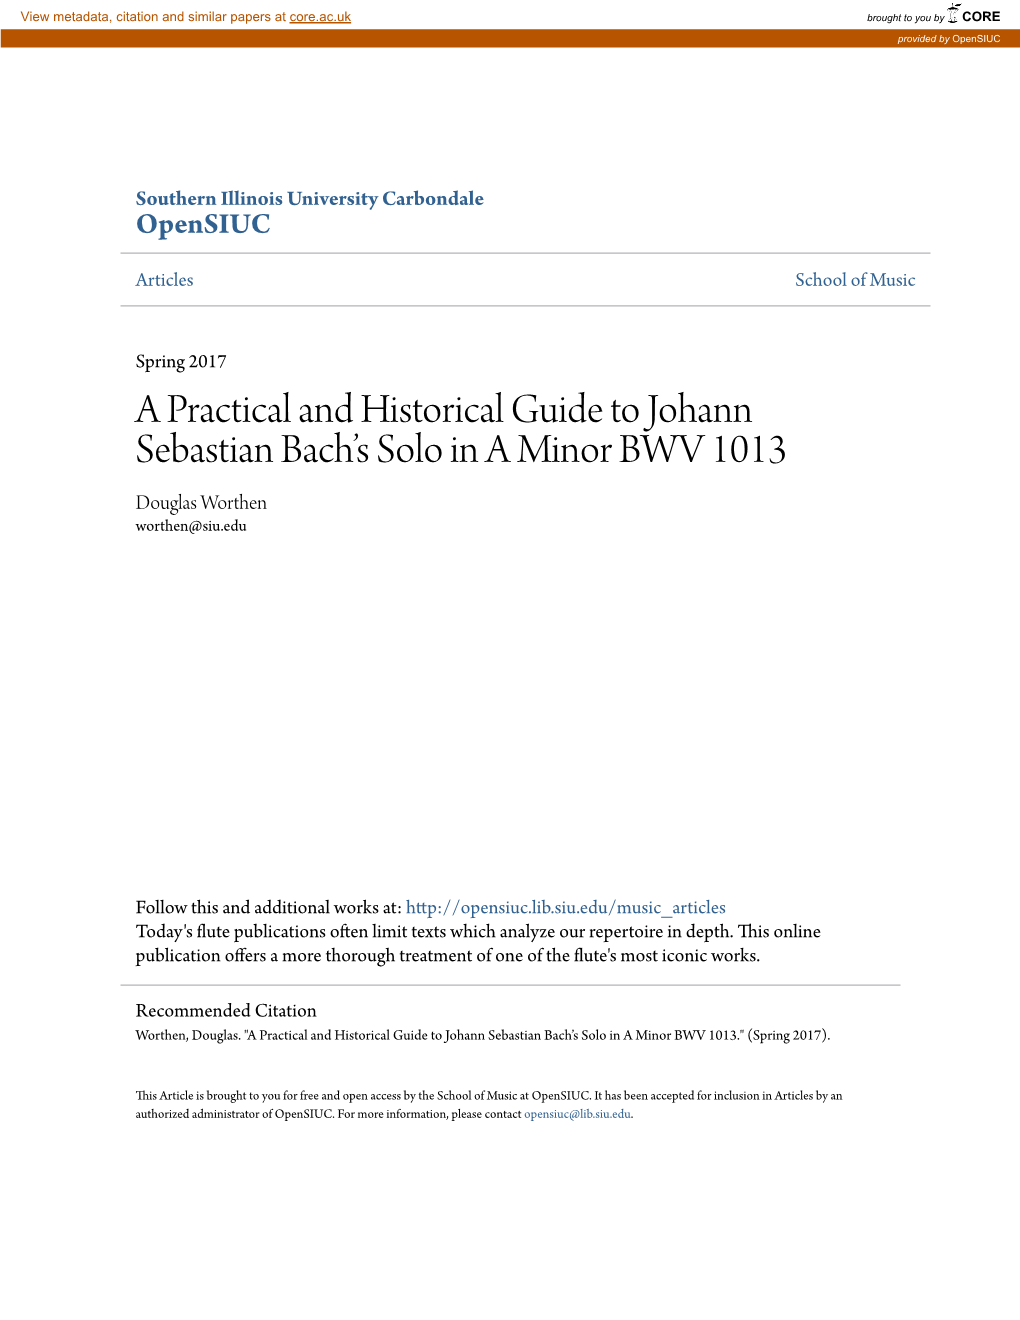 A Practical and Historical Guide to Johann Sebastian Bach's Solo in A